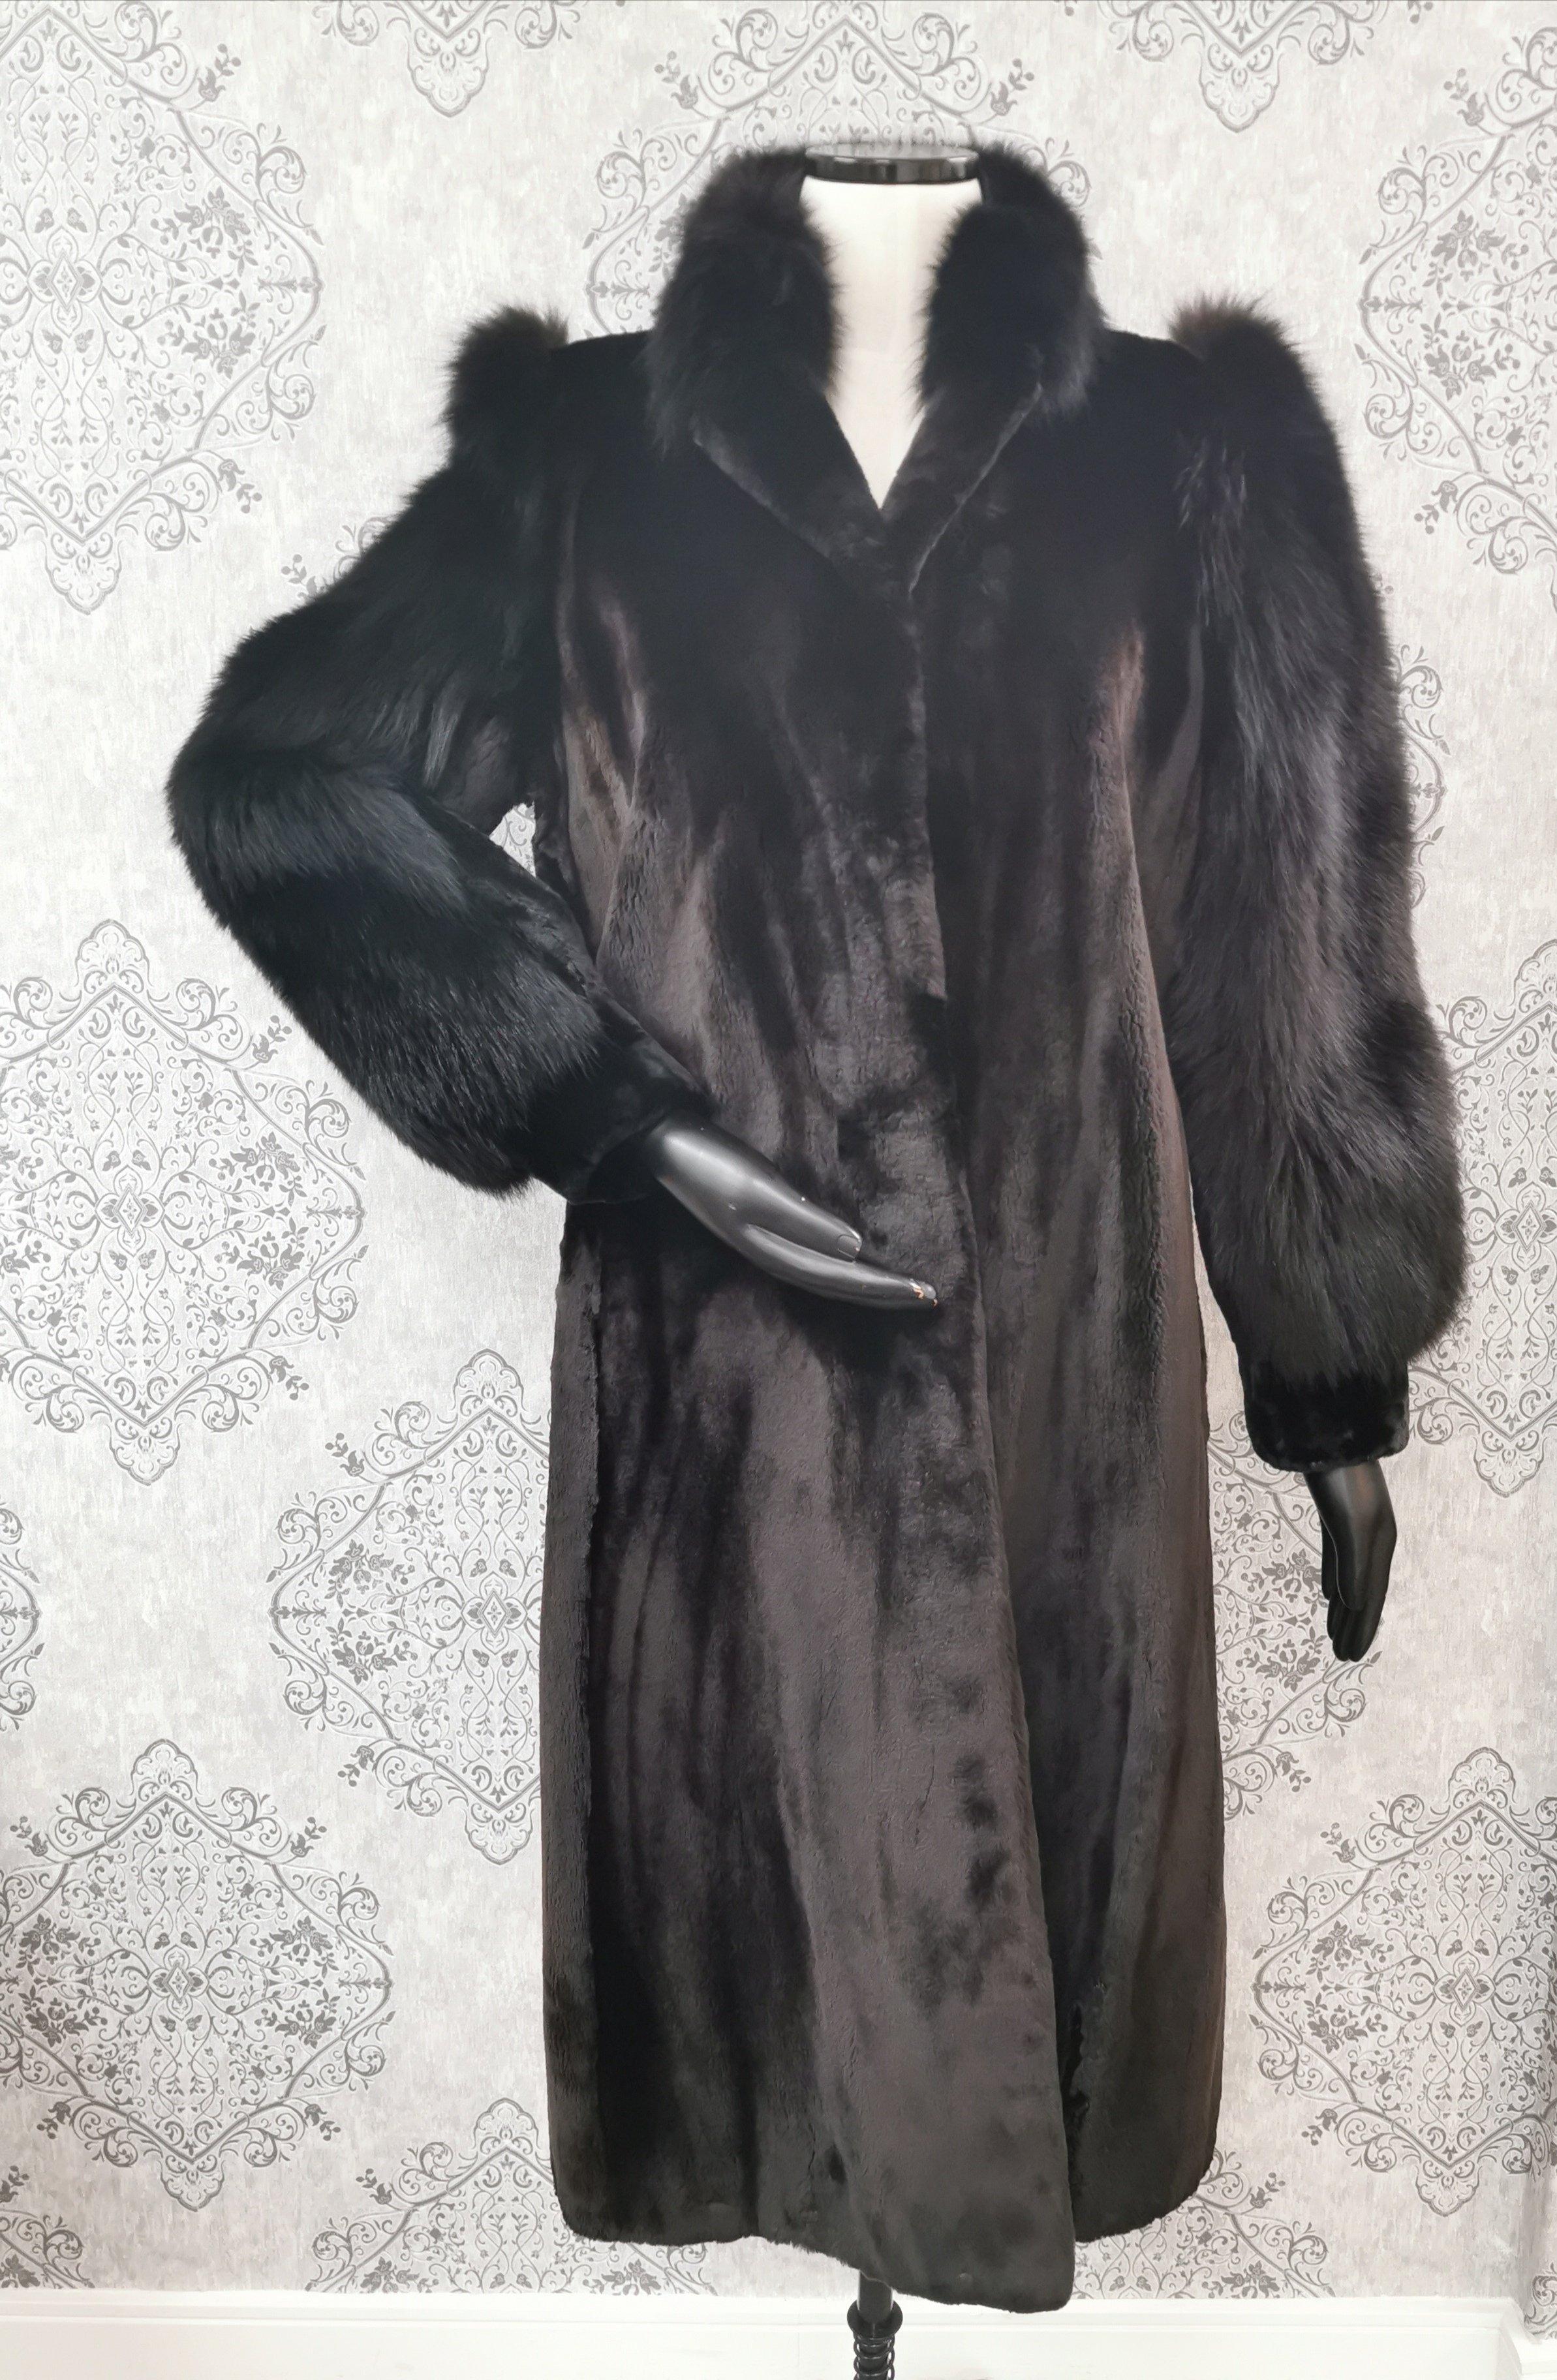 PRODUCT DESCRIPTION:

Pre-owned luxurious Holt Renfrew Alaskan Seal Fur Coat With Fox Fur Trim around the collar to hem and shoulders.

Condition: Pristine

Closure: Hooks & Eyes

Color: Black 

Material: Alaskan Seal and Fox
Garment type: 